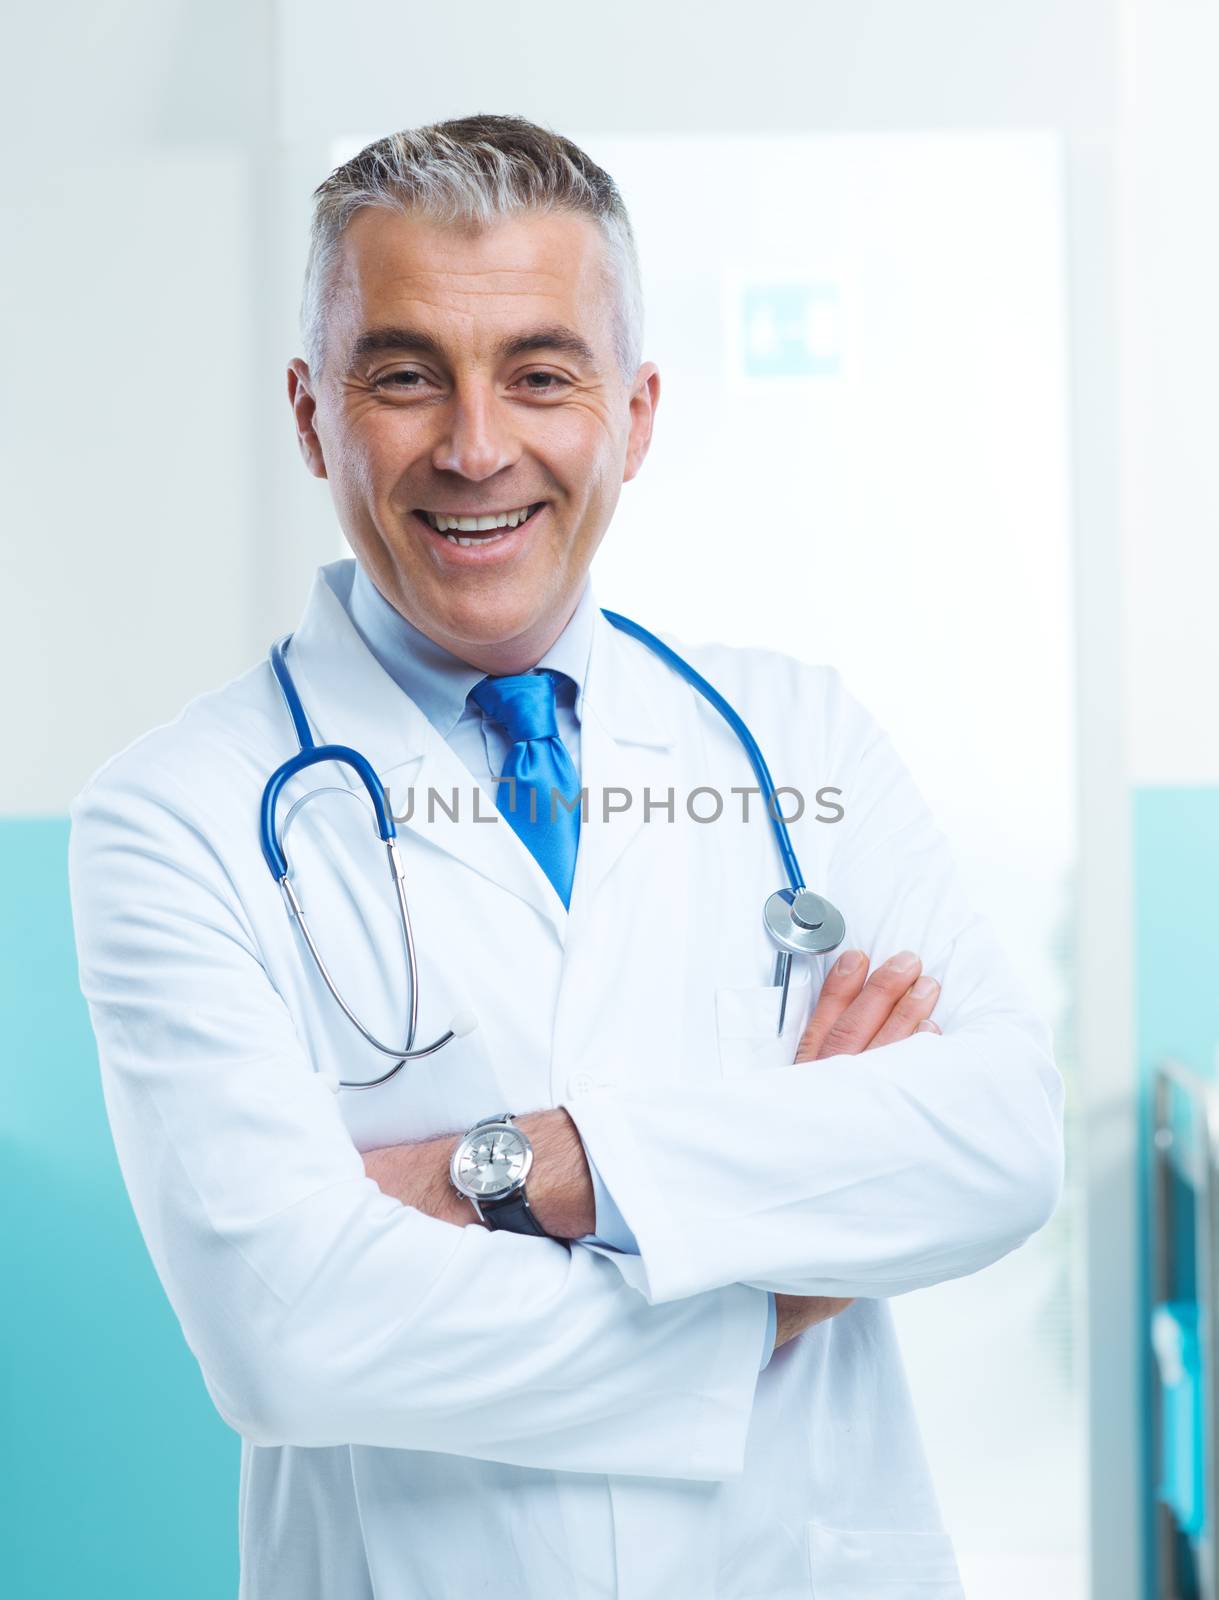 Friendly doctor portrait with arms crossed and medical equipment in teh background.